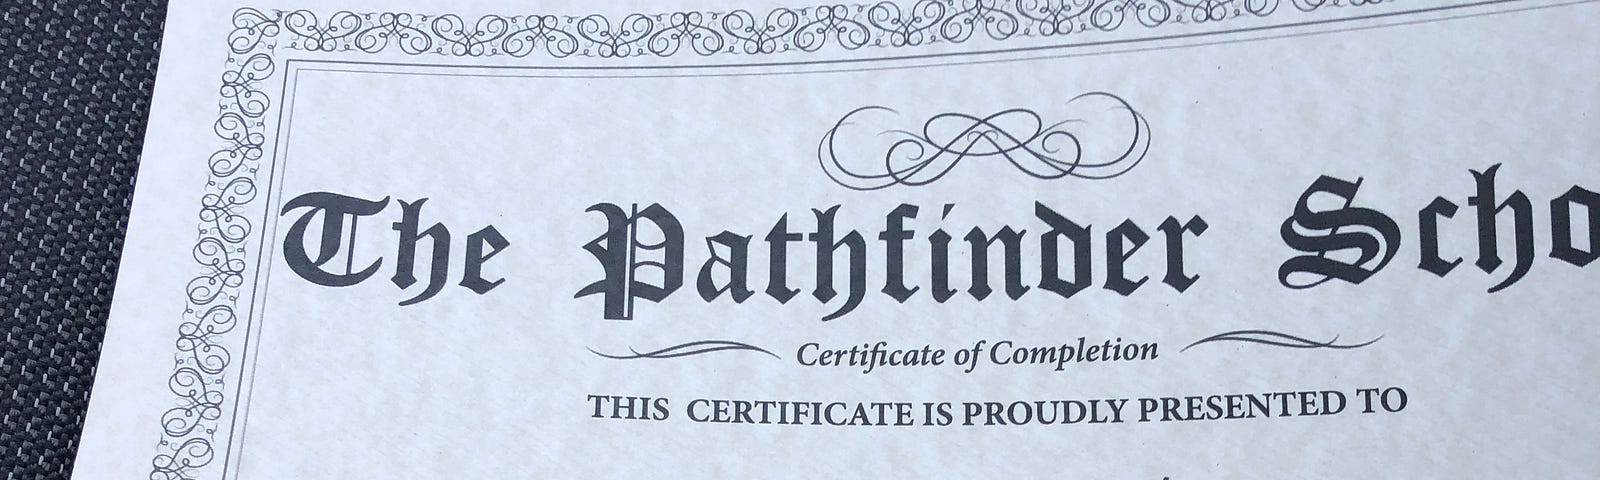 Close-up photograph of the author’s Pathfinder School Certificate of completion.